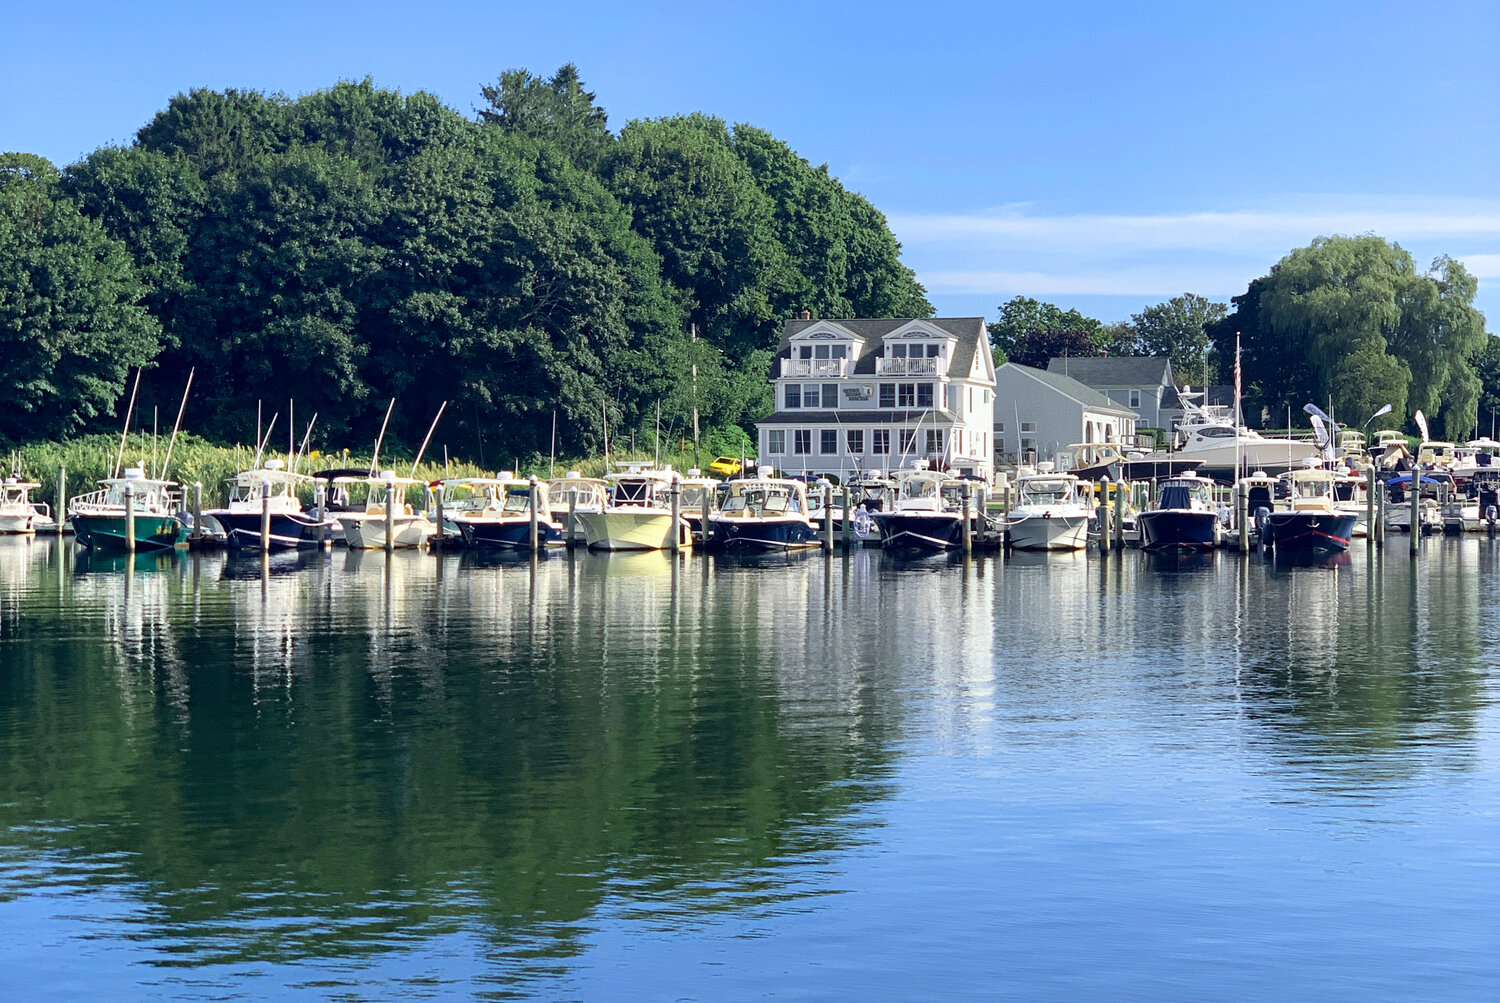 Not to be confused with the seaside resort, Ocean House 
Marina is located on Ninigret Pond